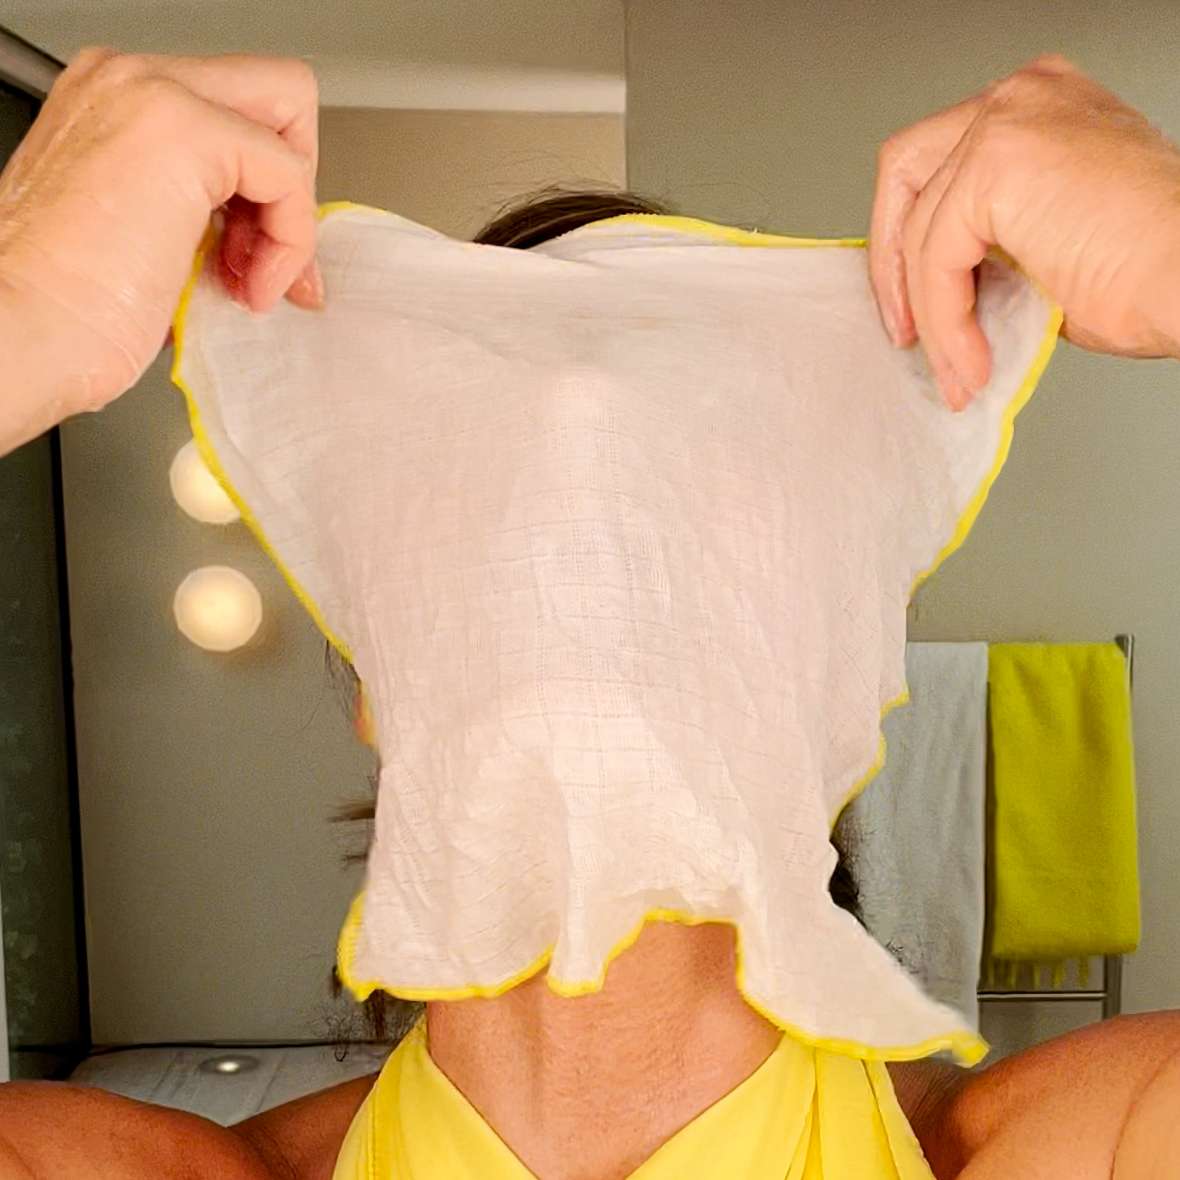 How to cleanse with a cloth